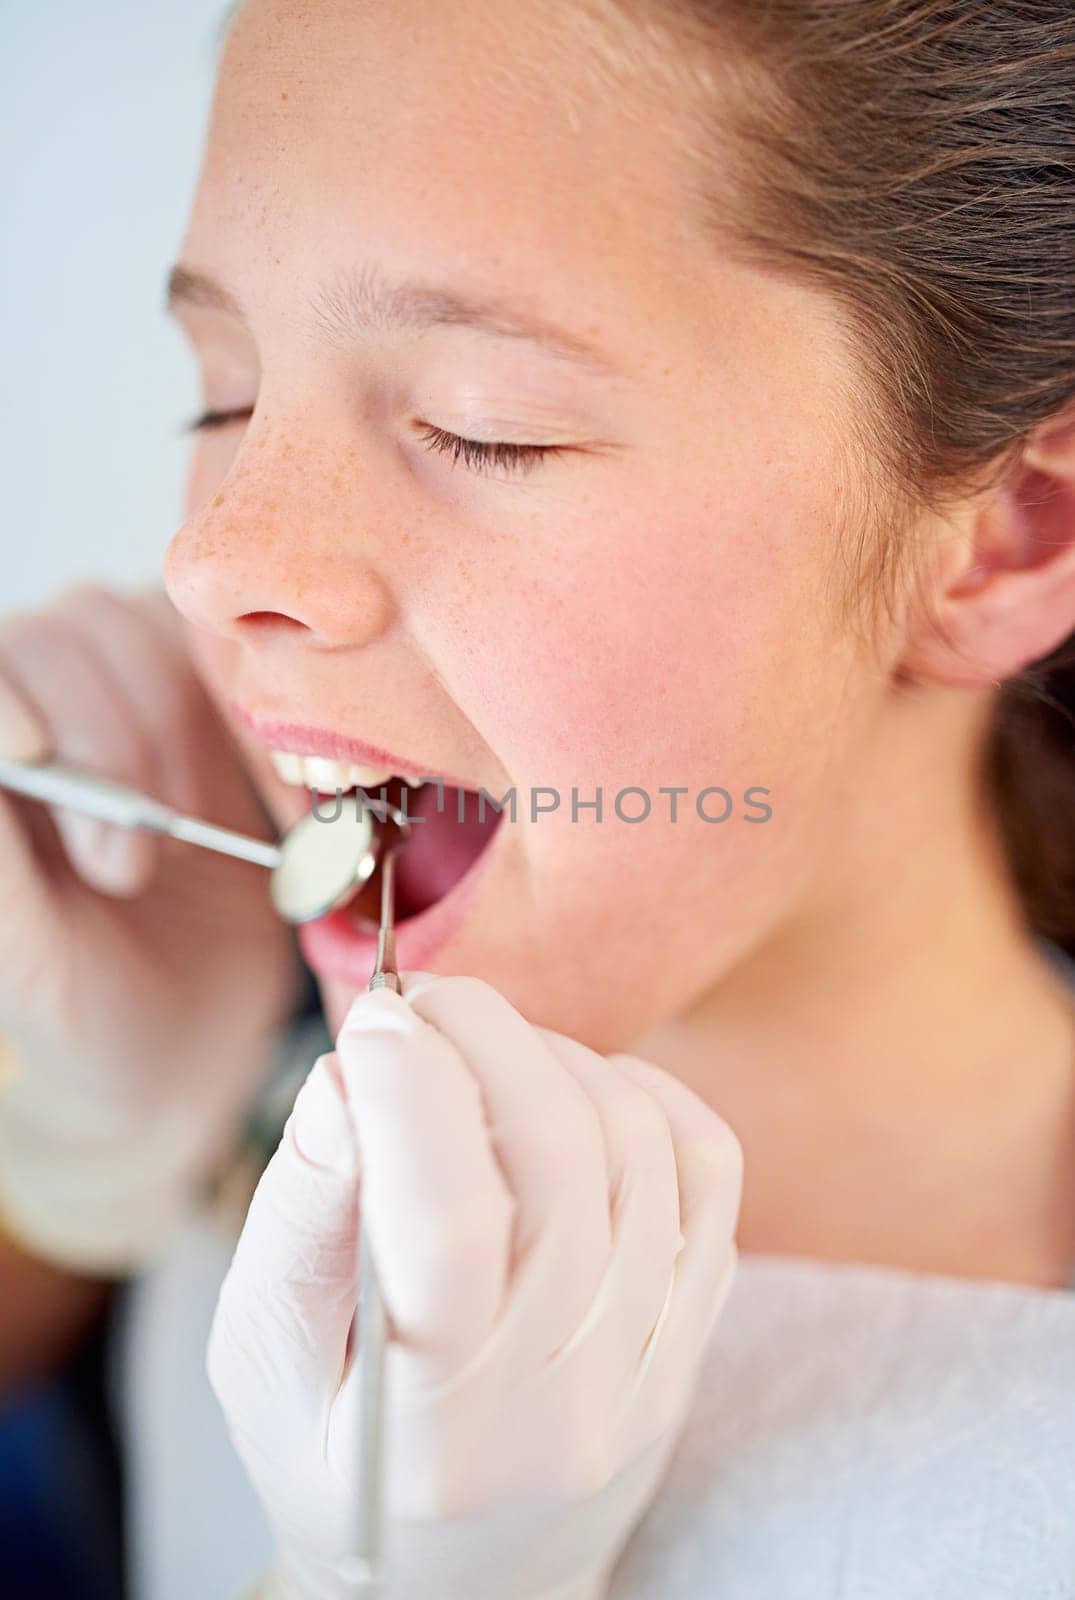 This isnt going to hurt a bit. Closeup shot of a young girl having a checkup at the dentist